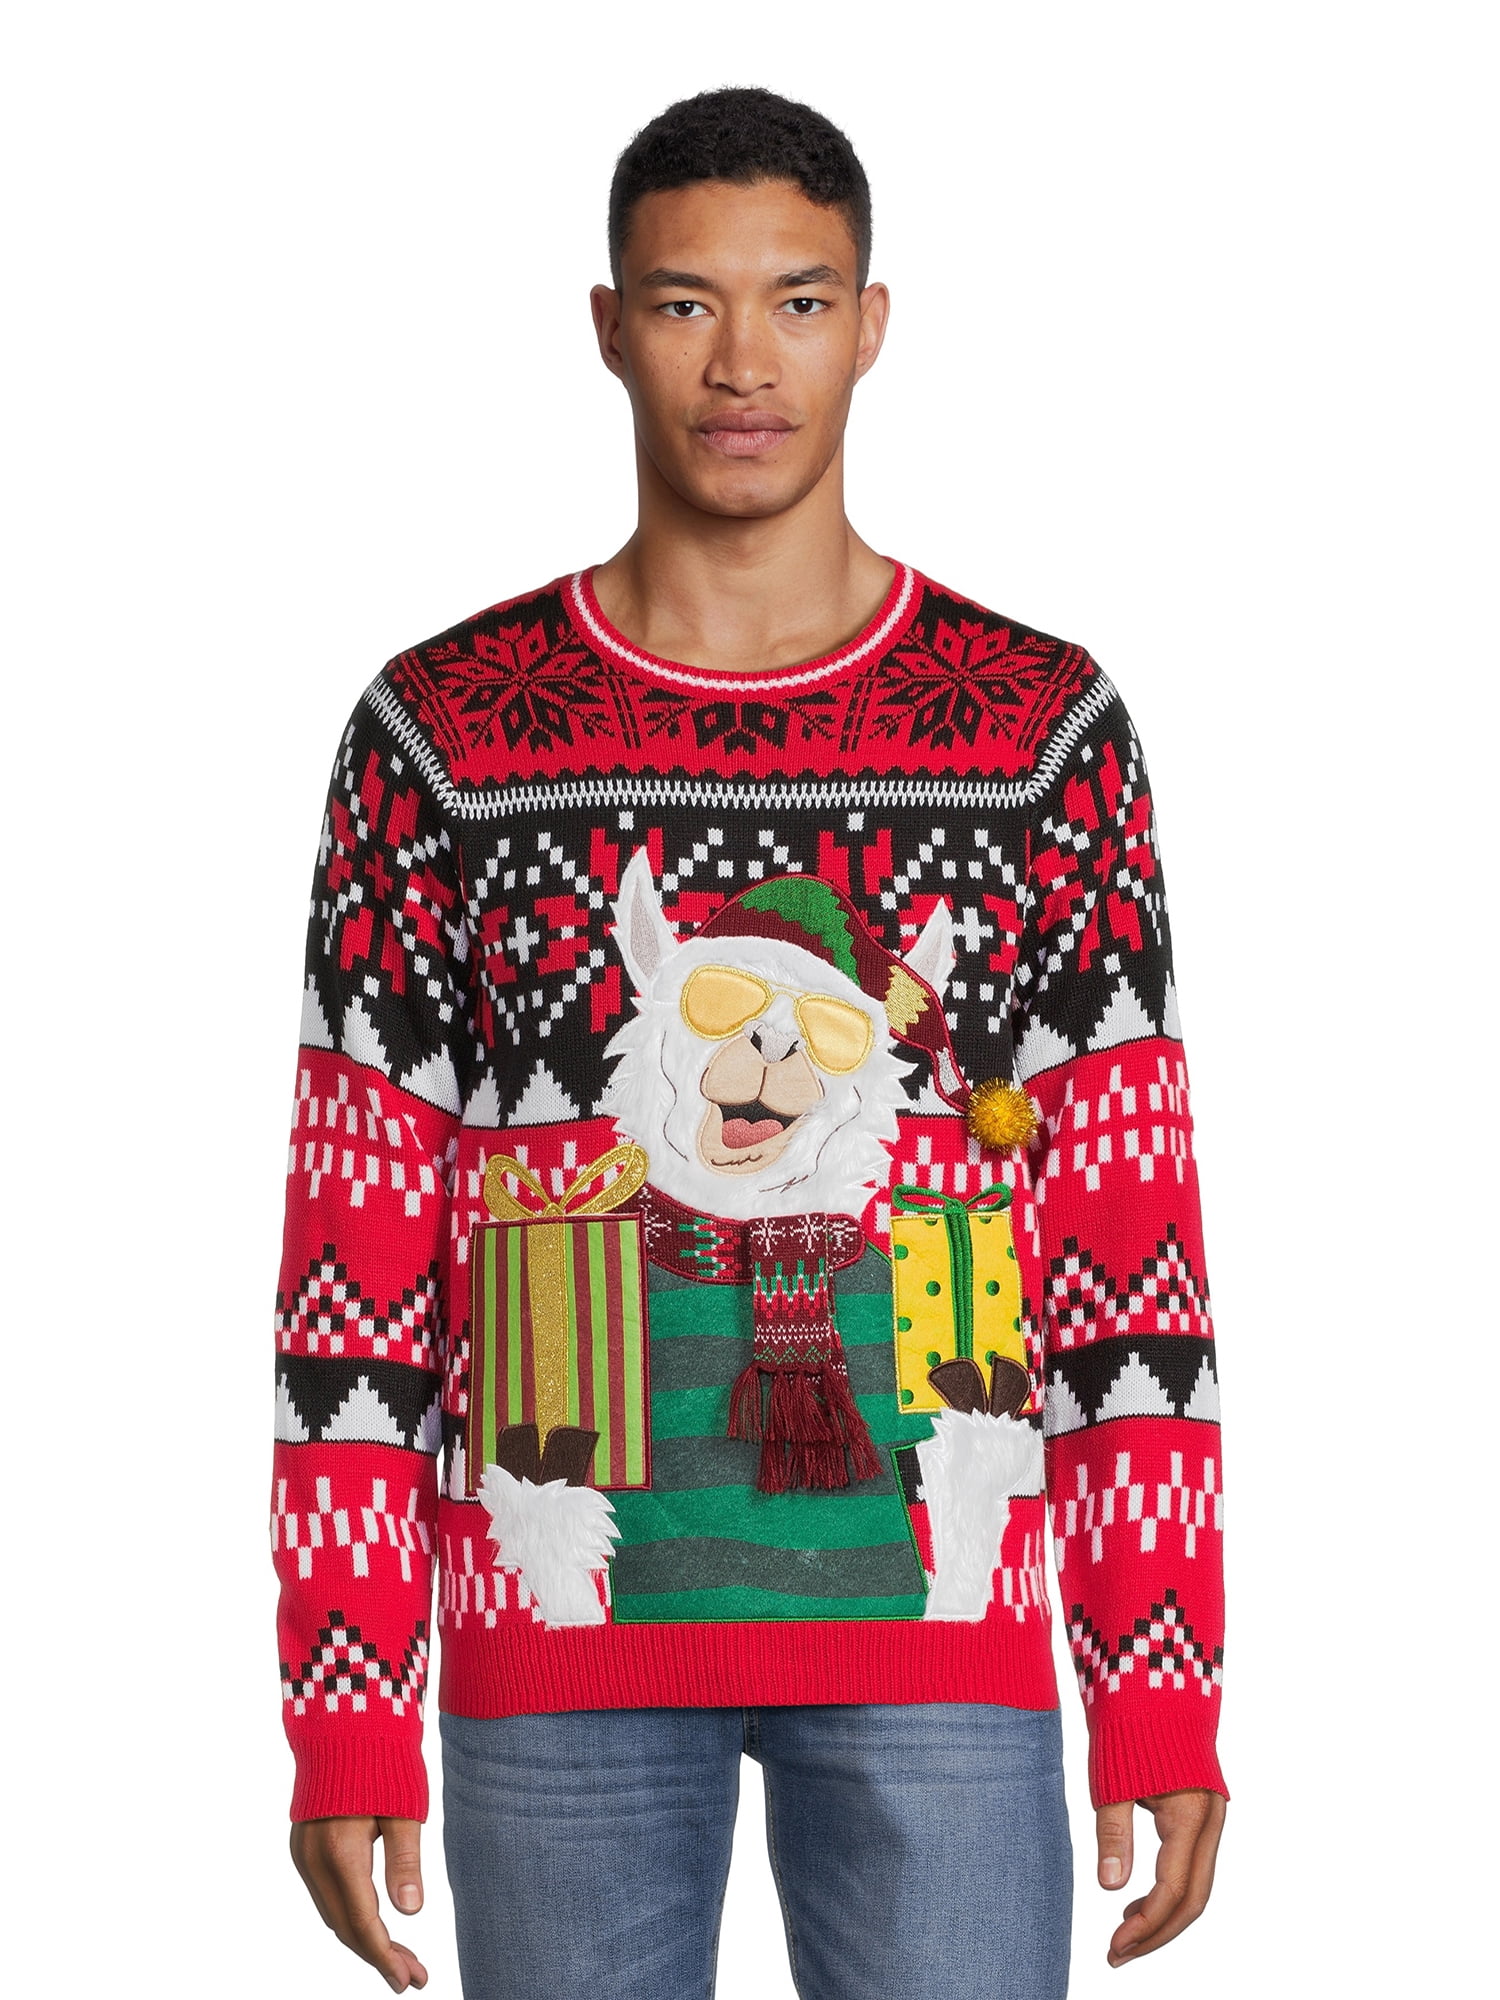 Jolly Sweaters Men's and Big Men's Ugly Christmas Sweater, Sizes S-3XL ...